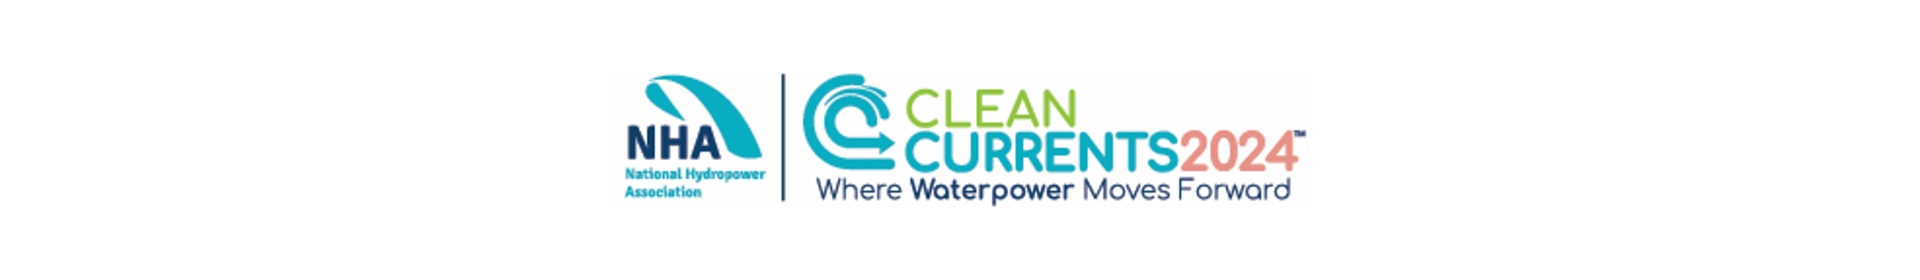 Clean Currents 2024 Event Banner